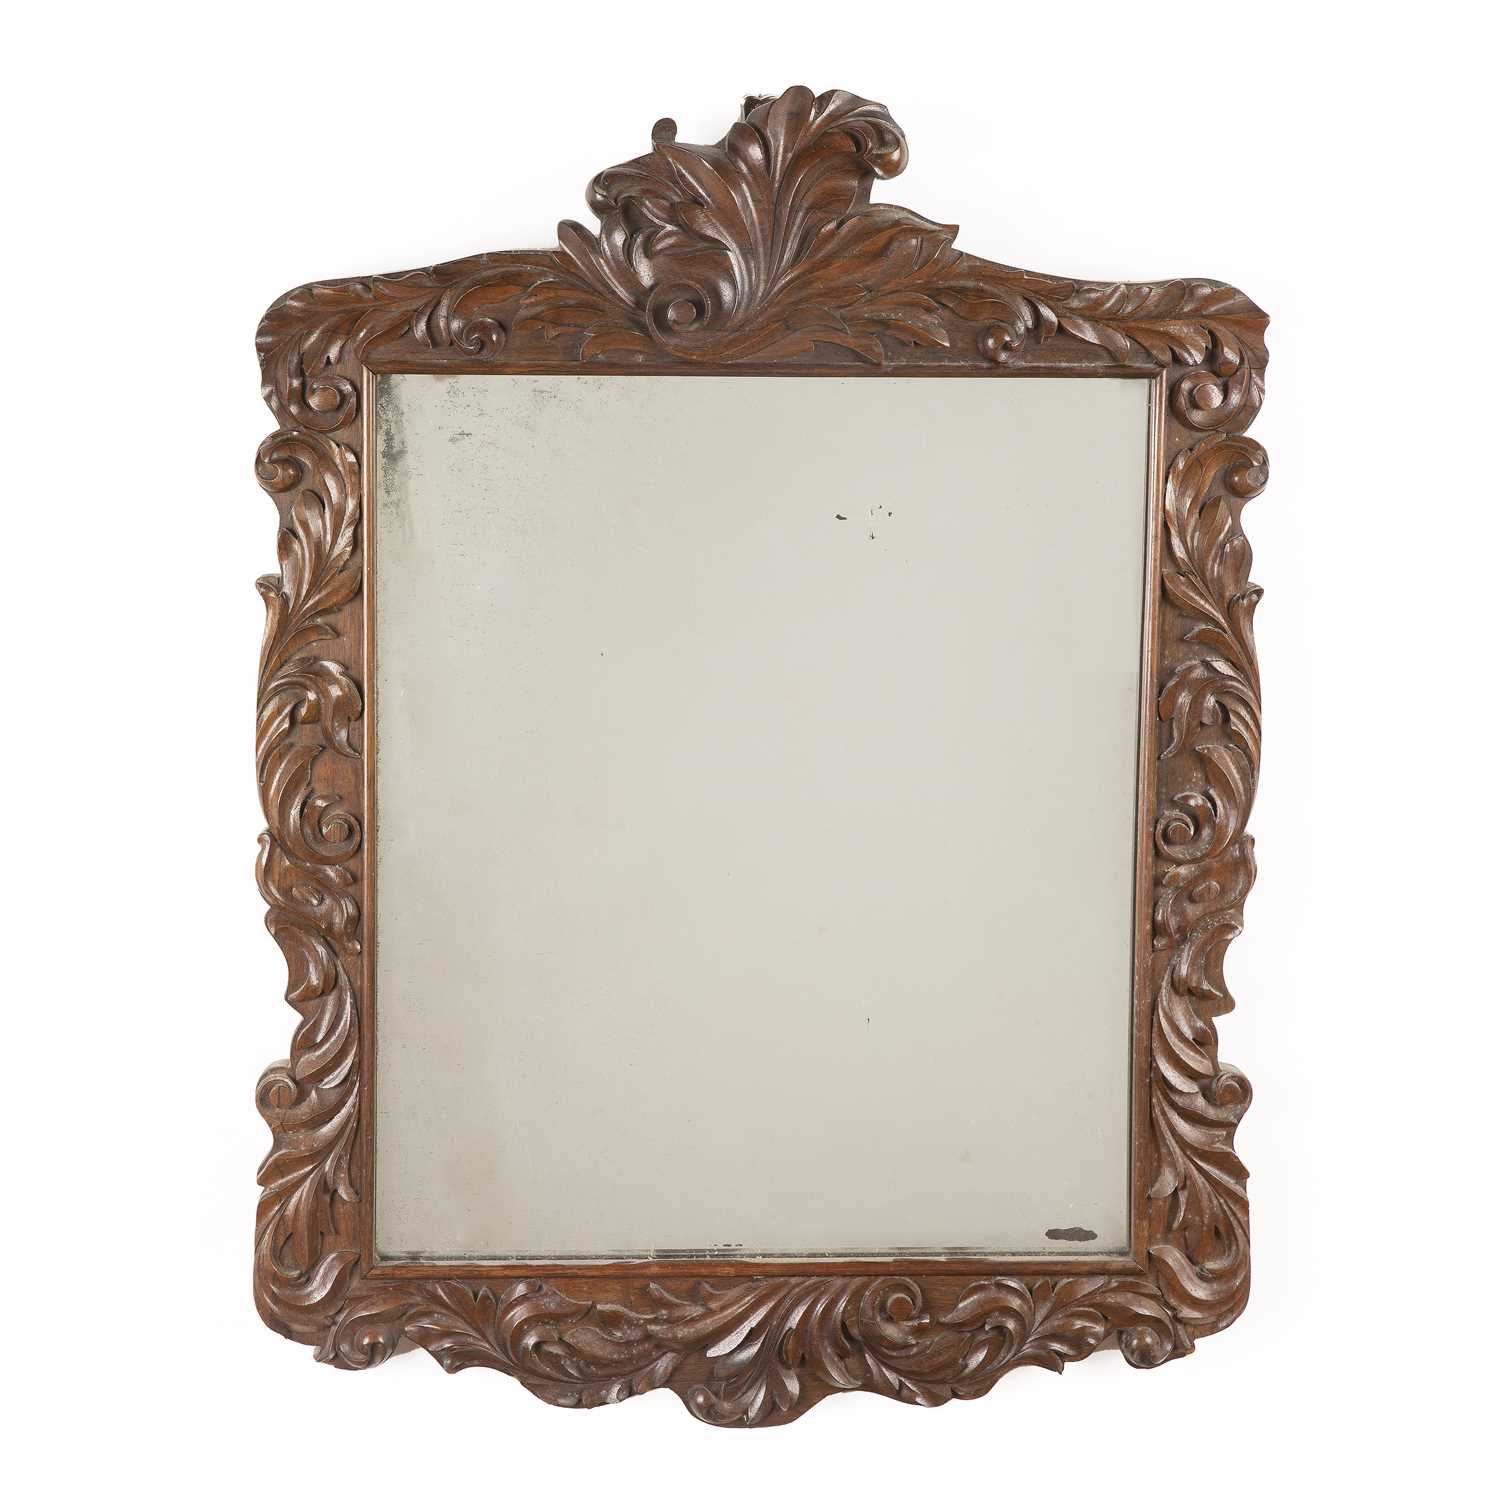 Carved oak framed mirror with scrolling foliate decoration, 80cm x 59.5cm Provenance: The Property